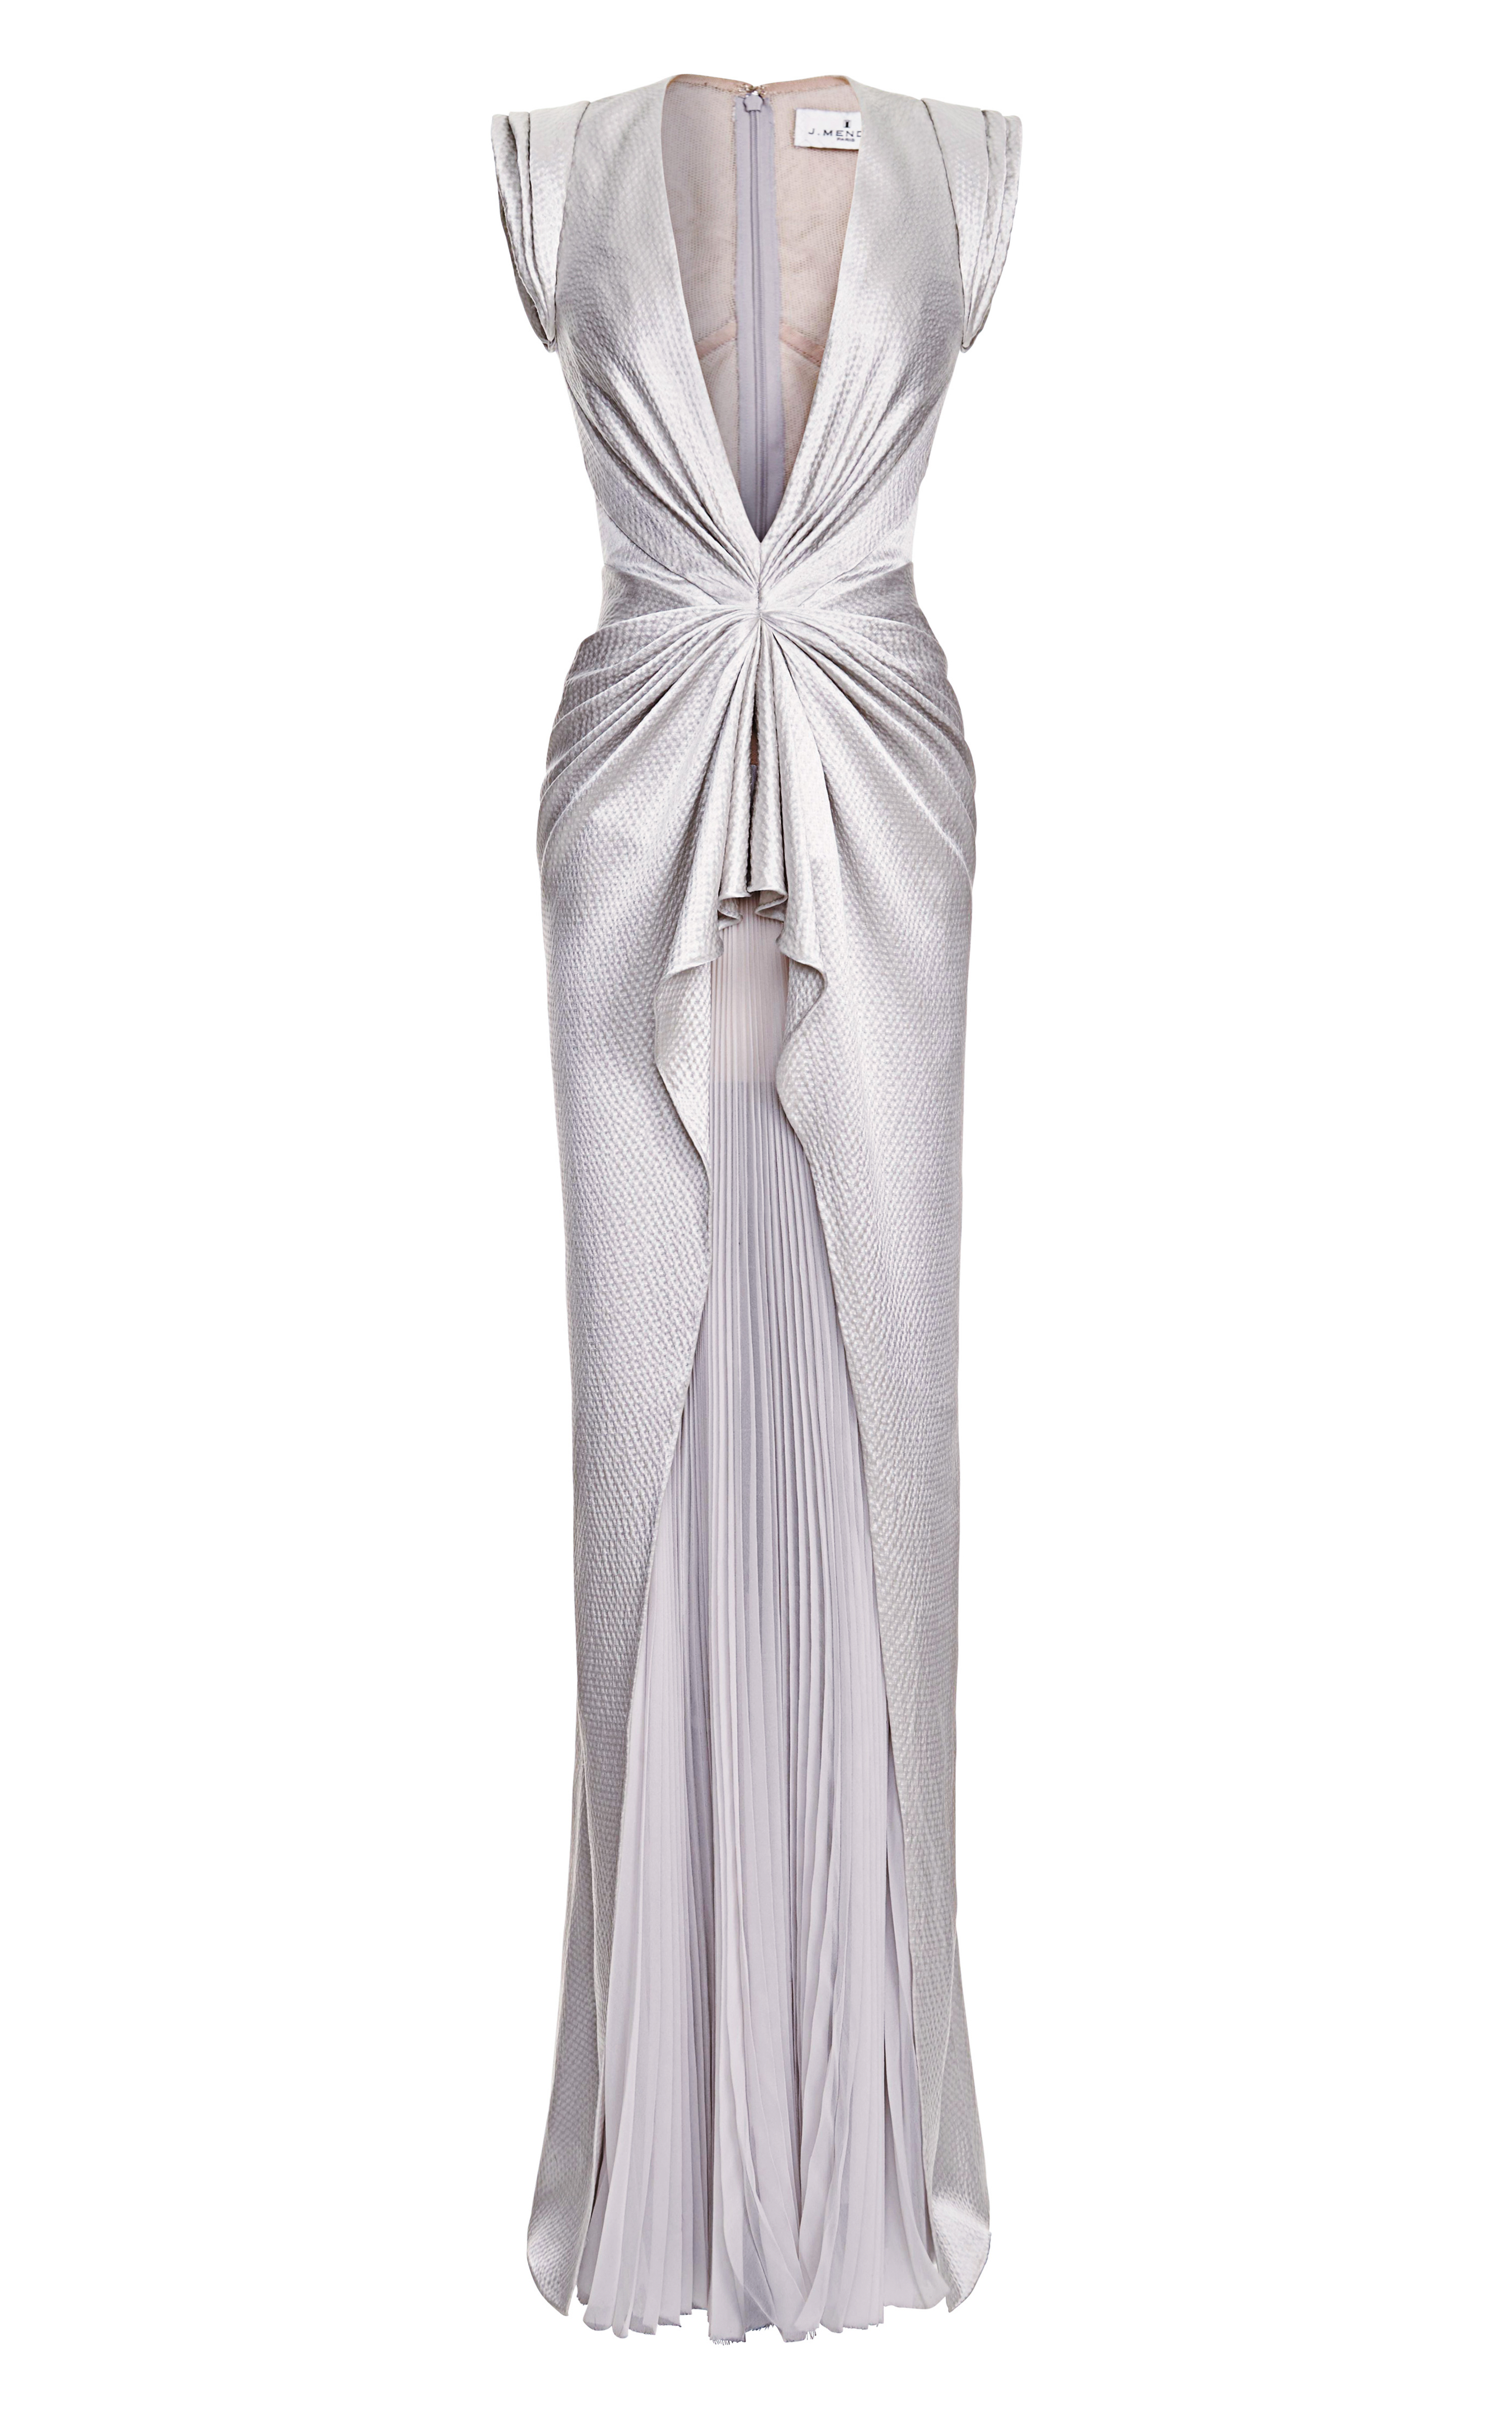 J. mendel Sleeveless Vneck Gown with Pleated Skirt in Gray | Lyst